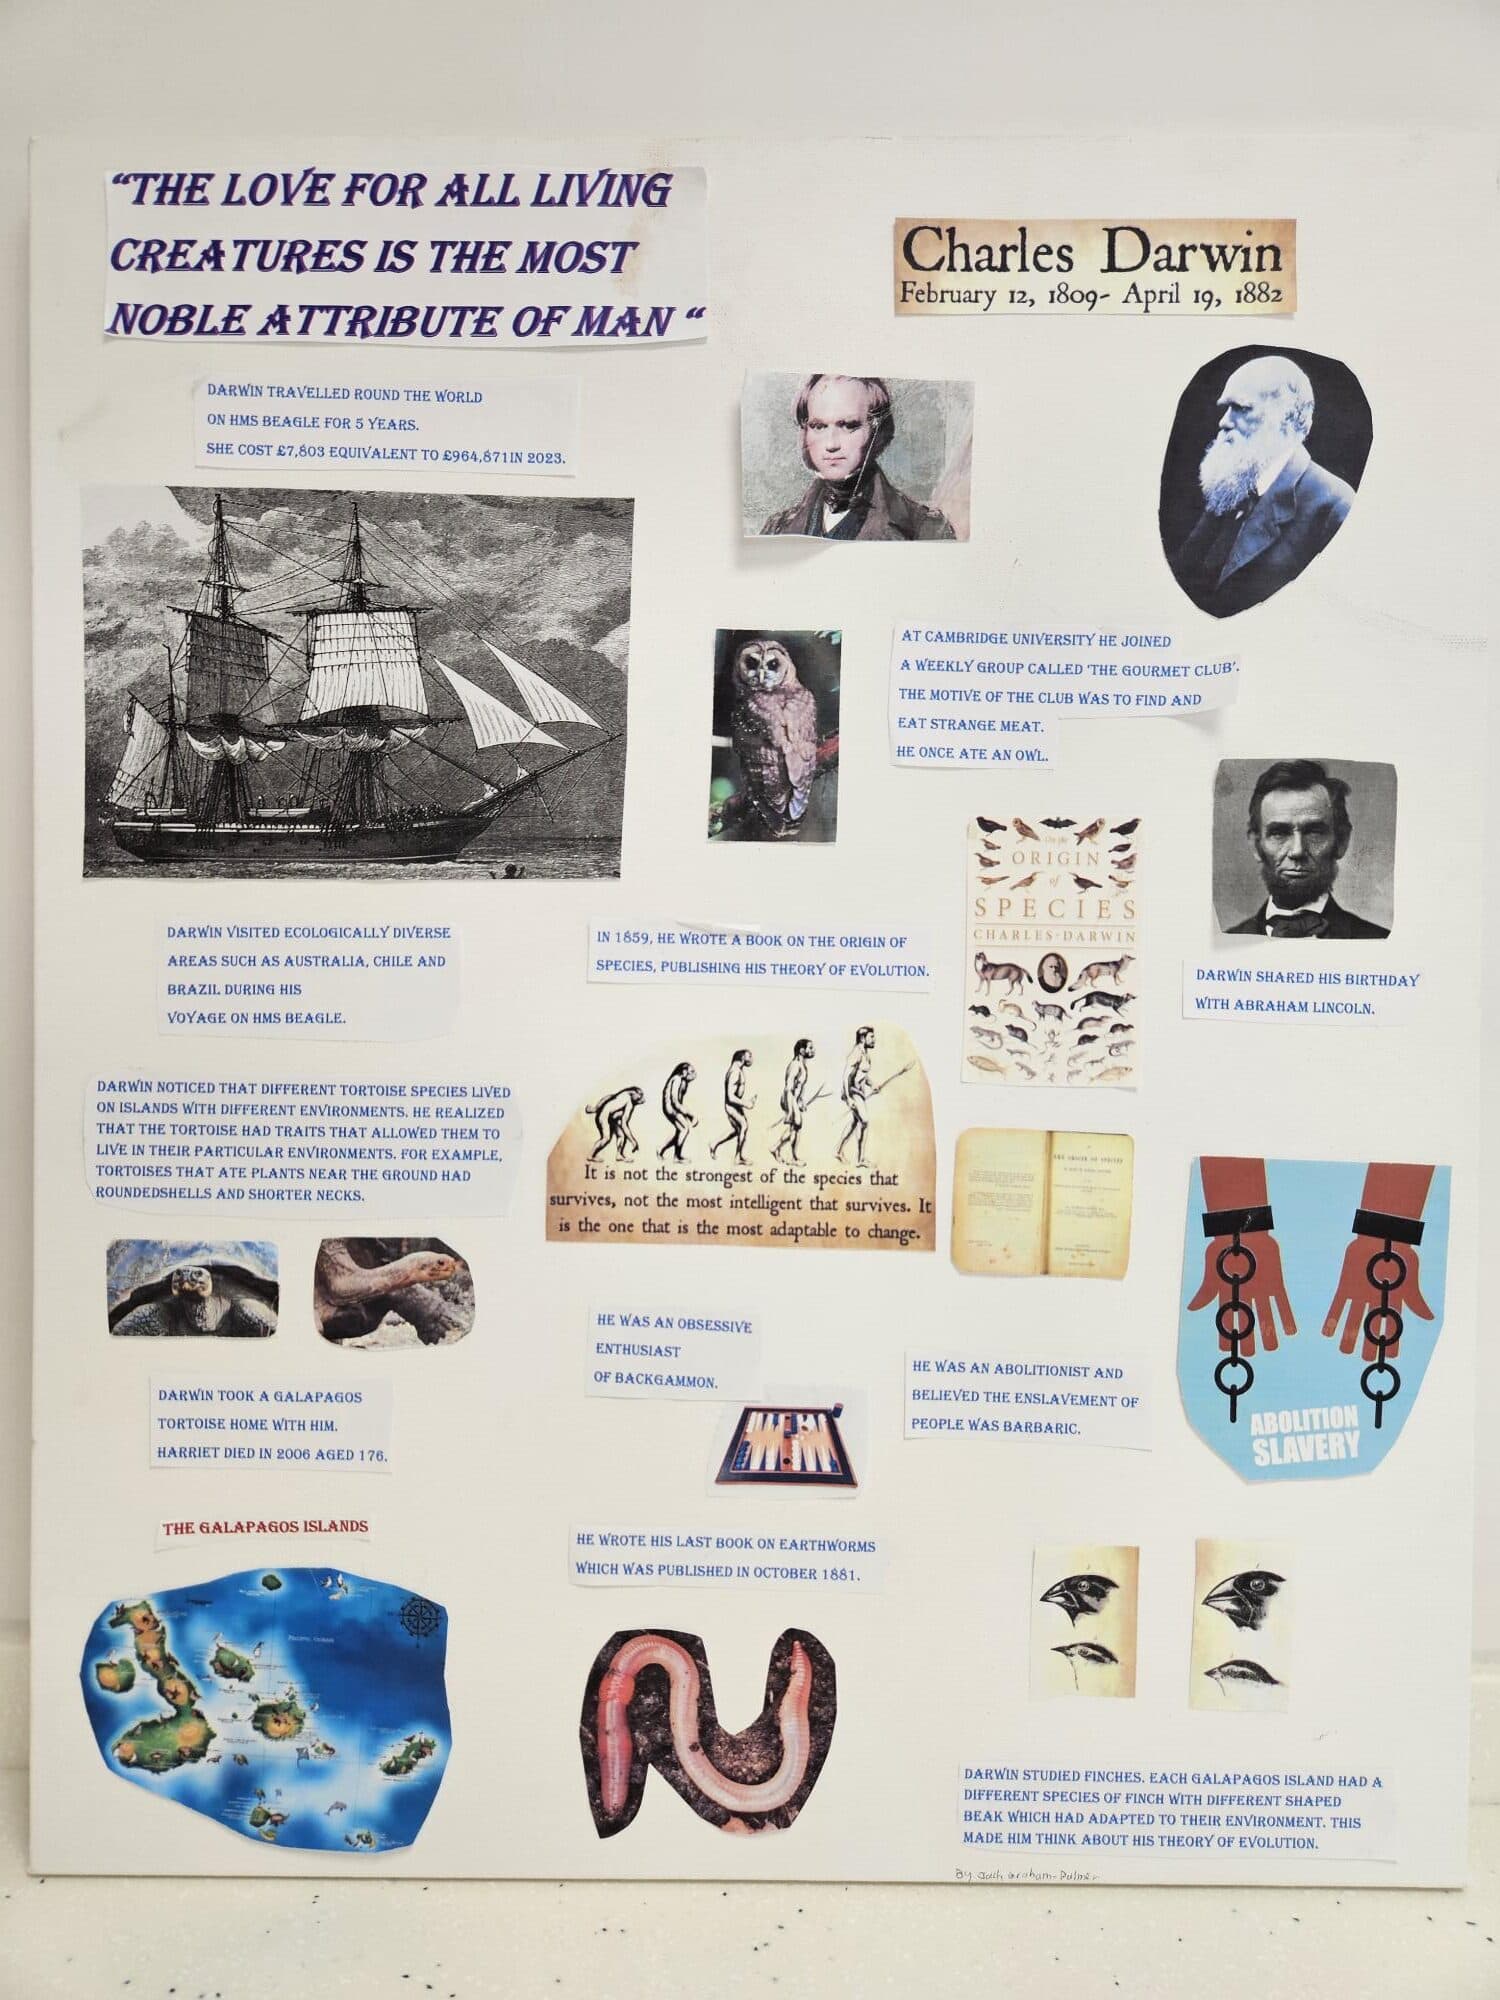 Science poster showing facts about Darwin